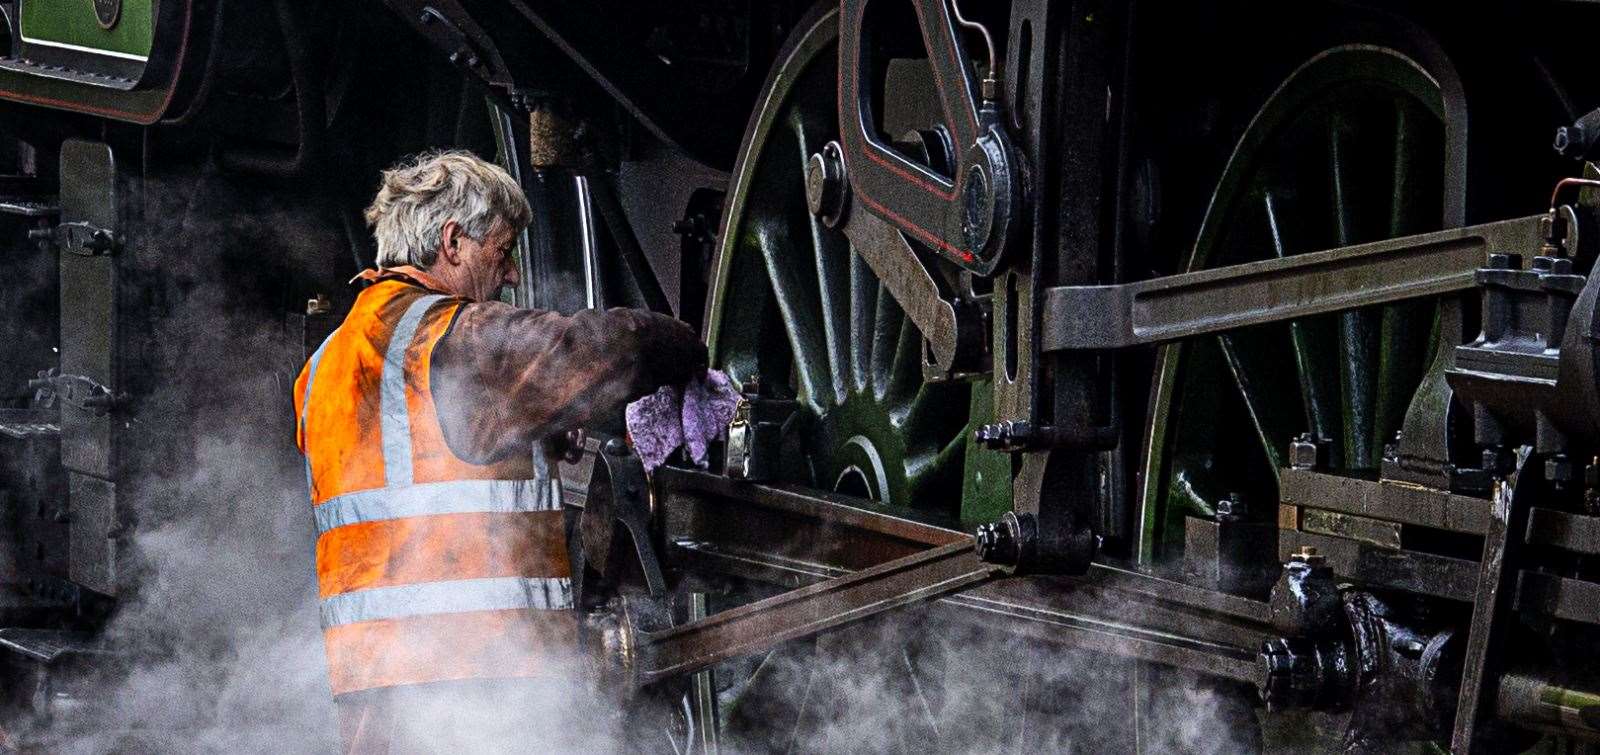 Brora's Louise MacKay got up close to show the gritty atmosphere of servicing a steam locomotive with her fourth-place finisher 